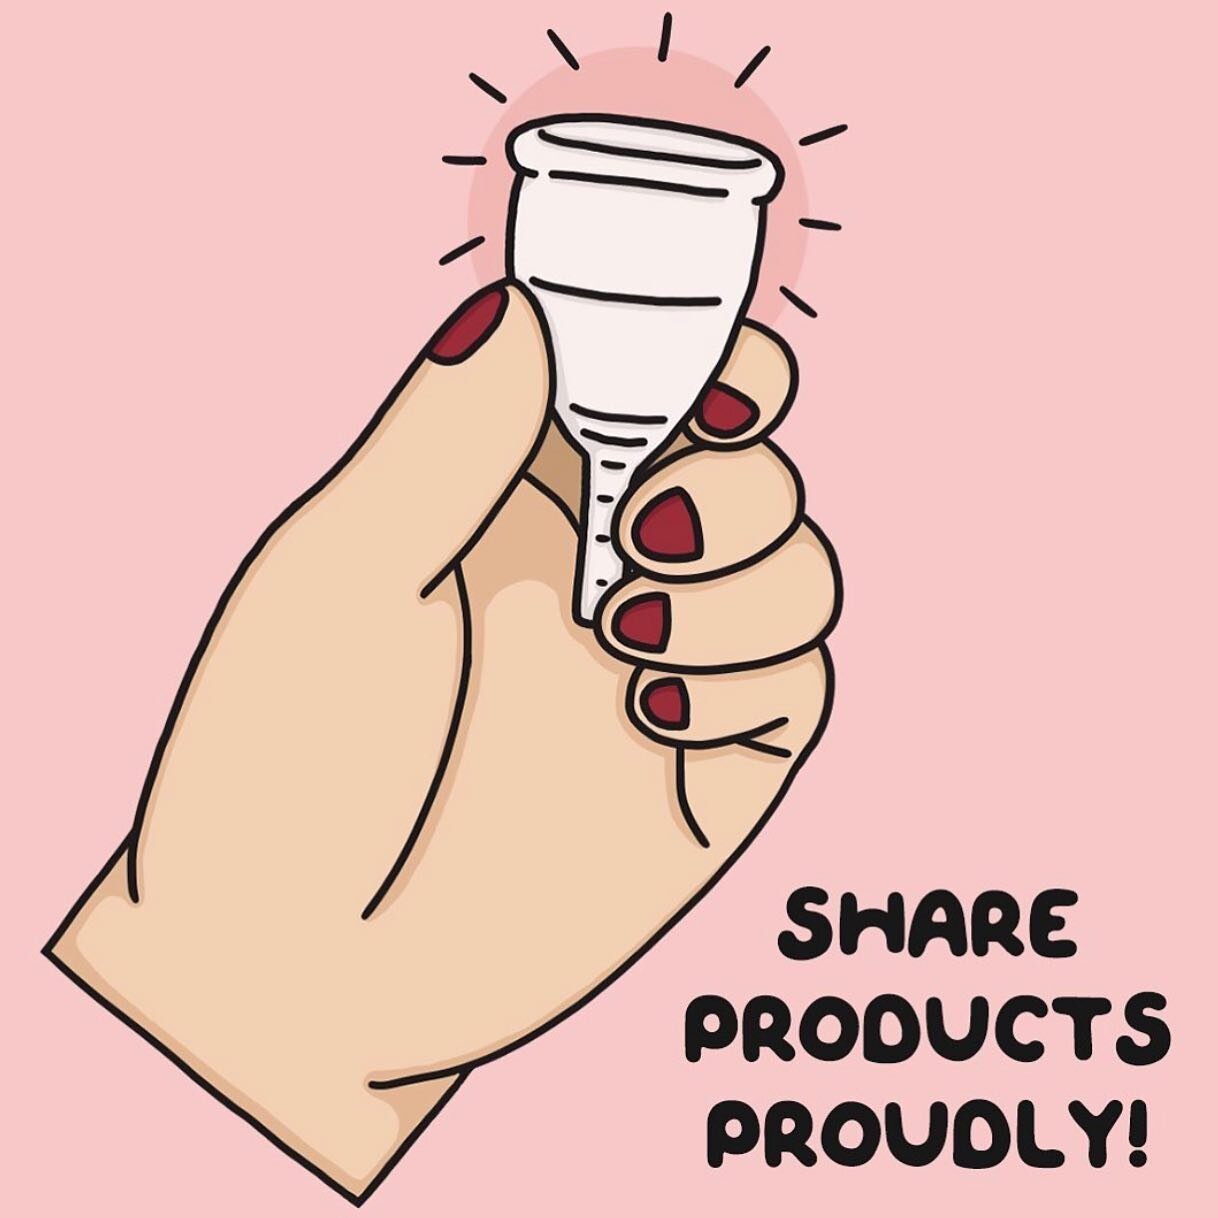 We agree with @period_prophetess❗️
(the artist featured above!) 

SHARE PERIOD PRODUCTS PROUDLY. 🩸❣️🌹

We sure will be. 

Periods are normal. 
The products we use to manage them are normal. 
That search for better utility in our products is normal.